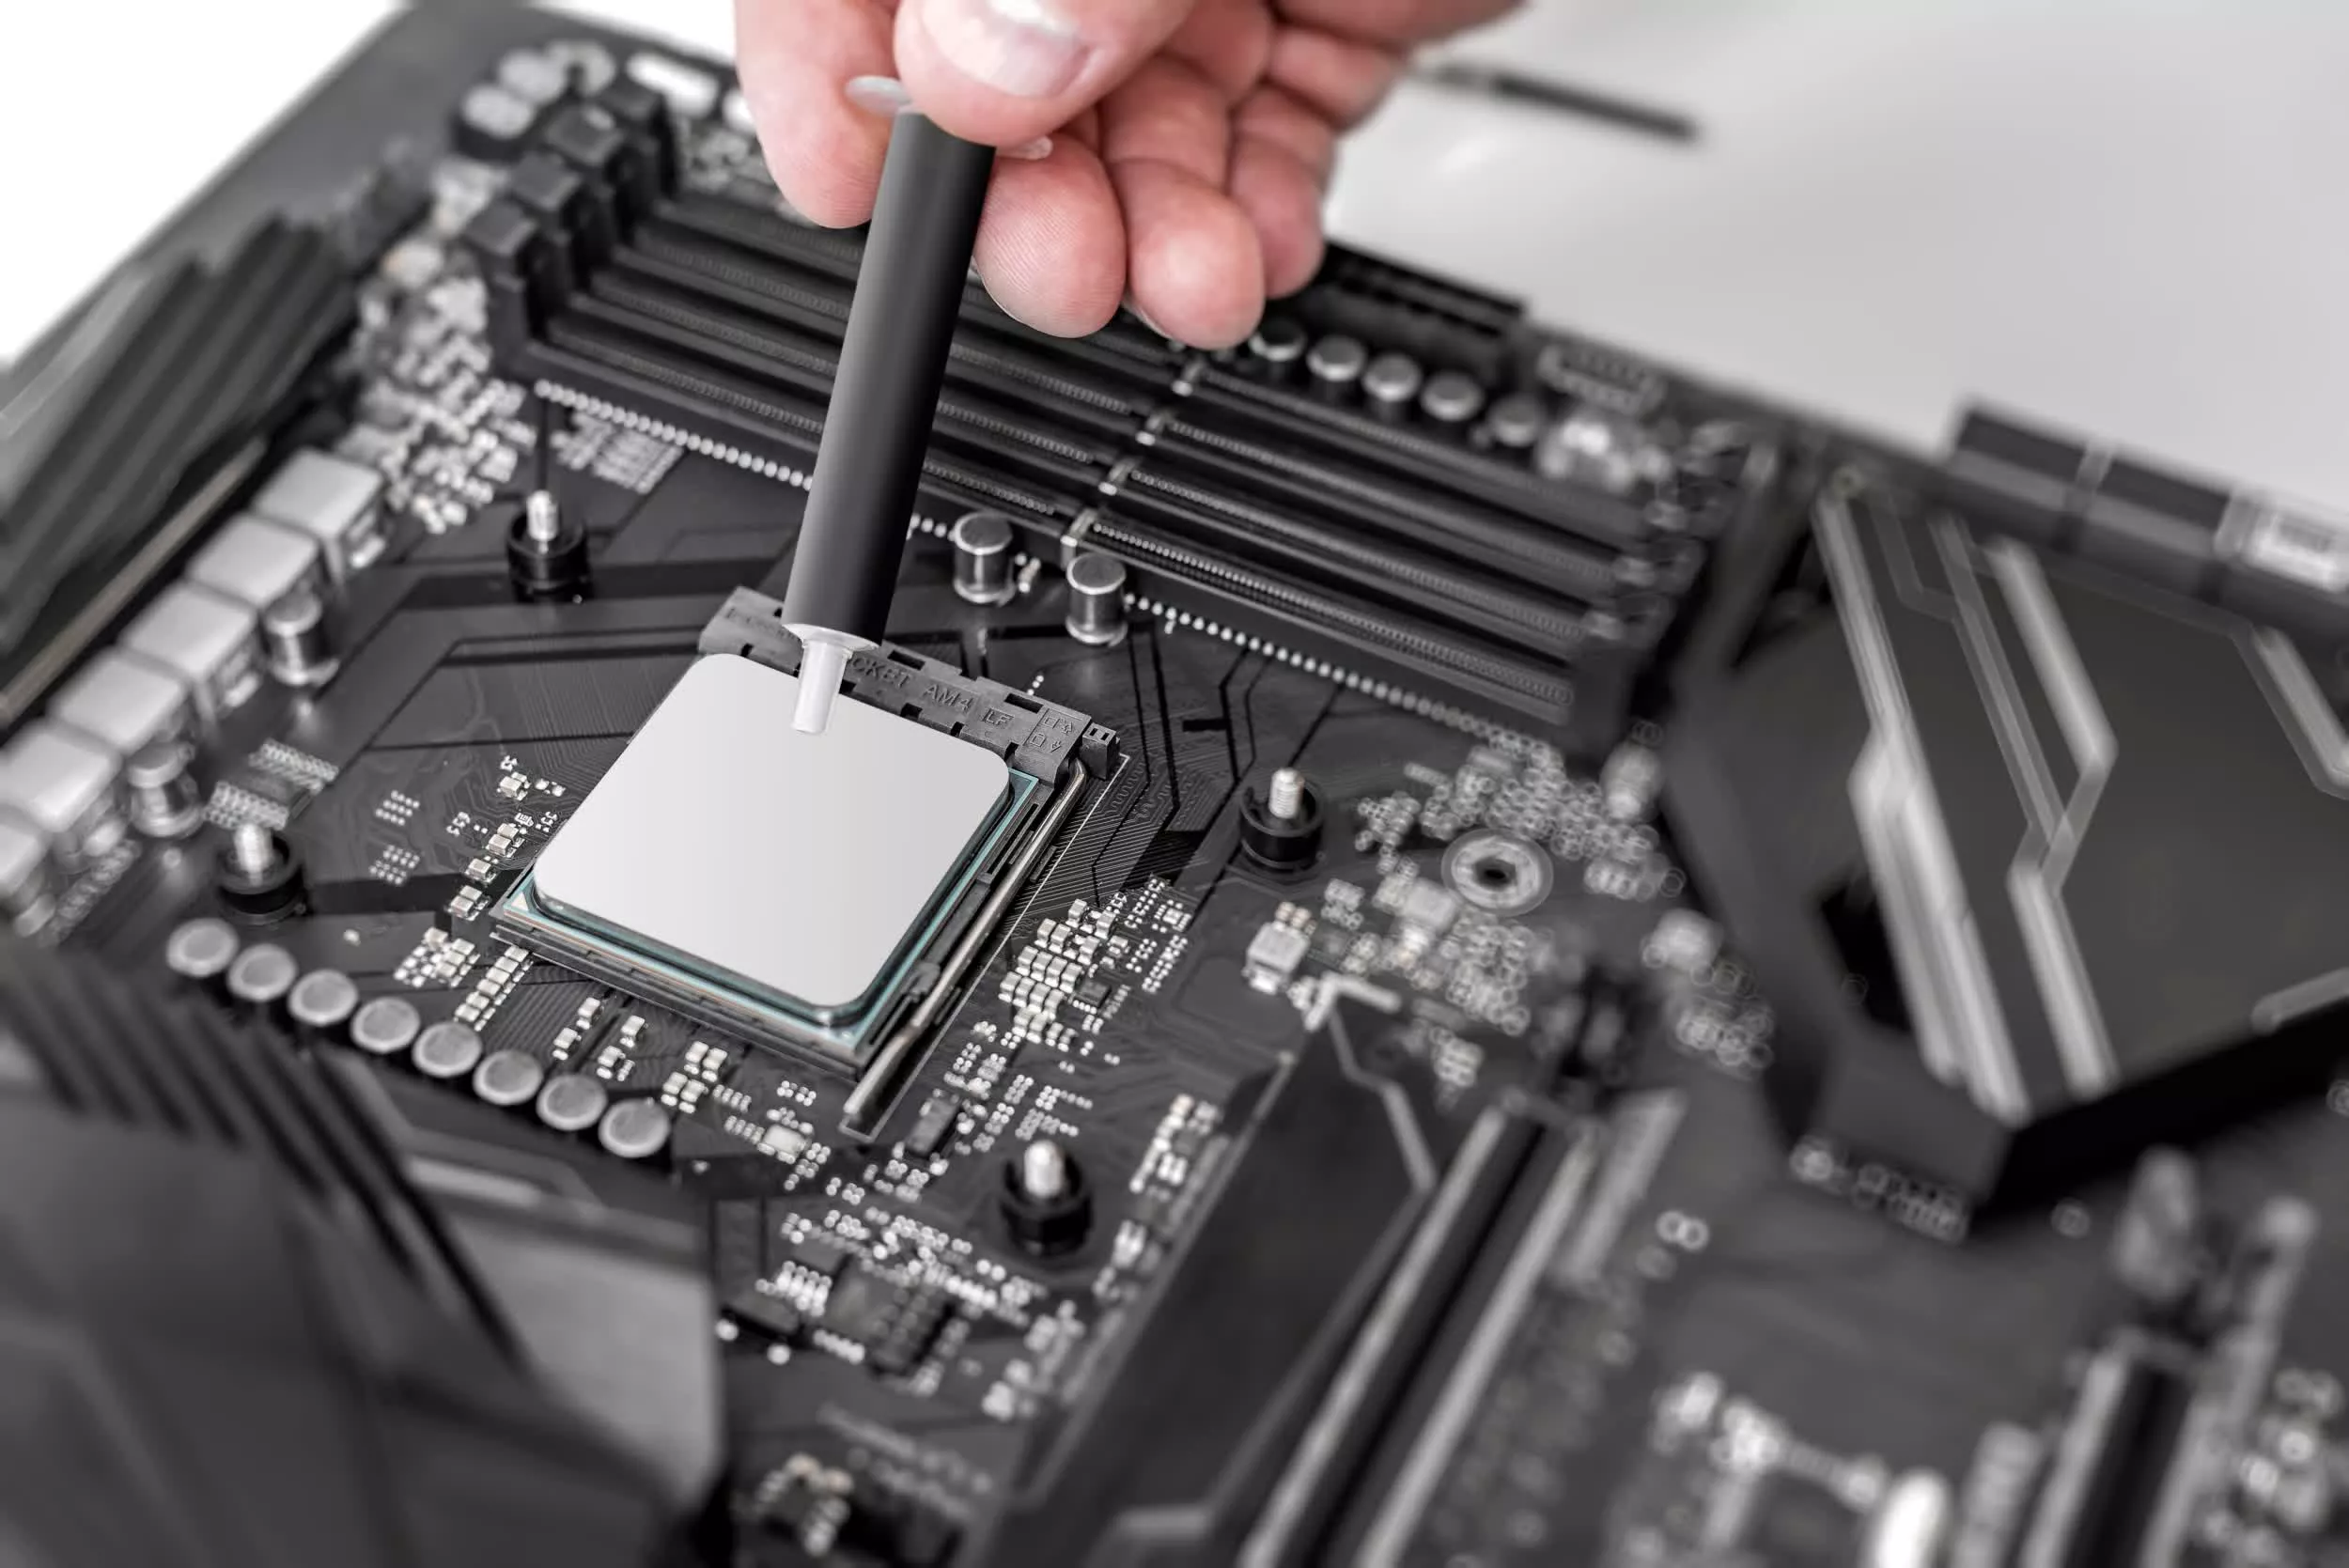 Arctic is launching a successor to its renowned MX-4 thermal paste